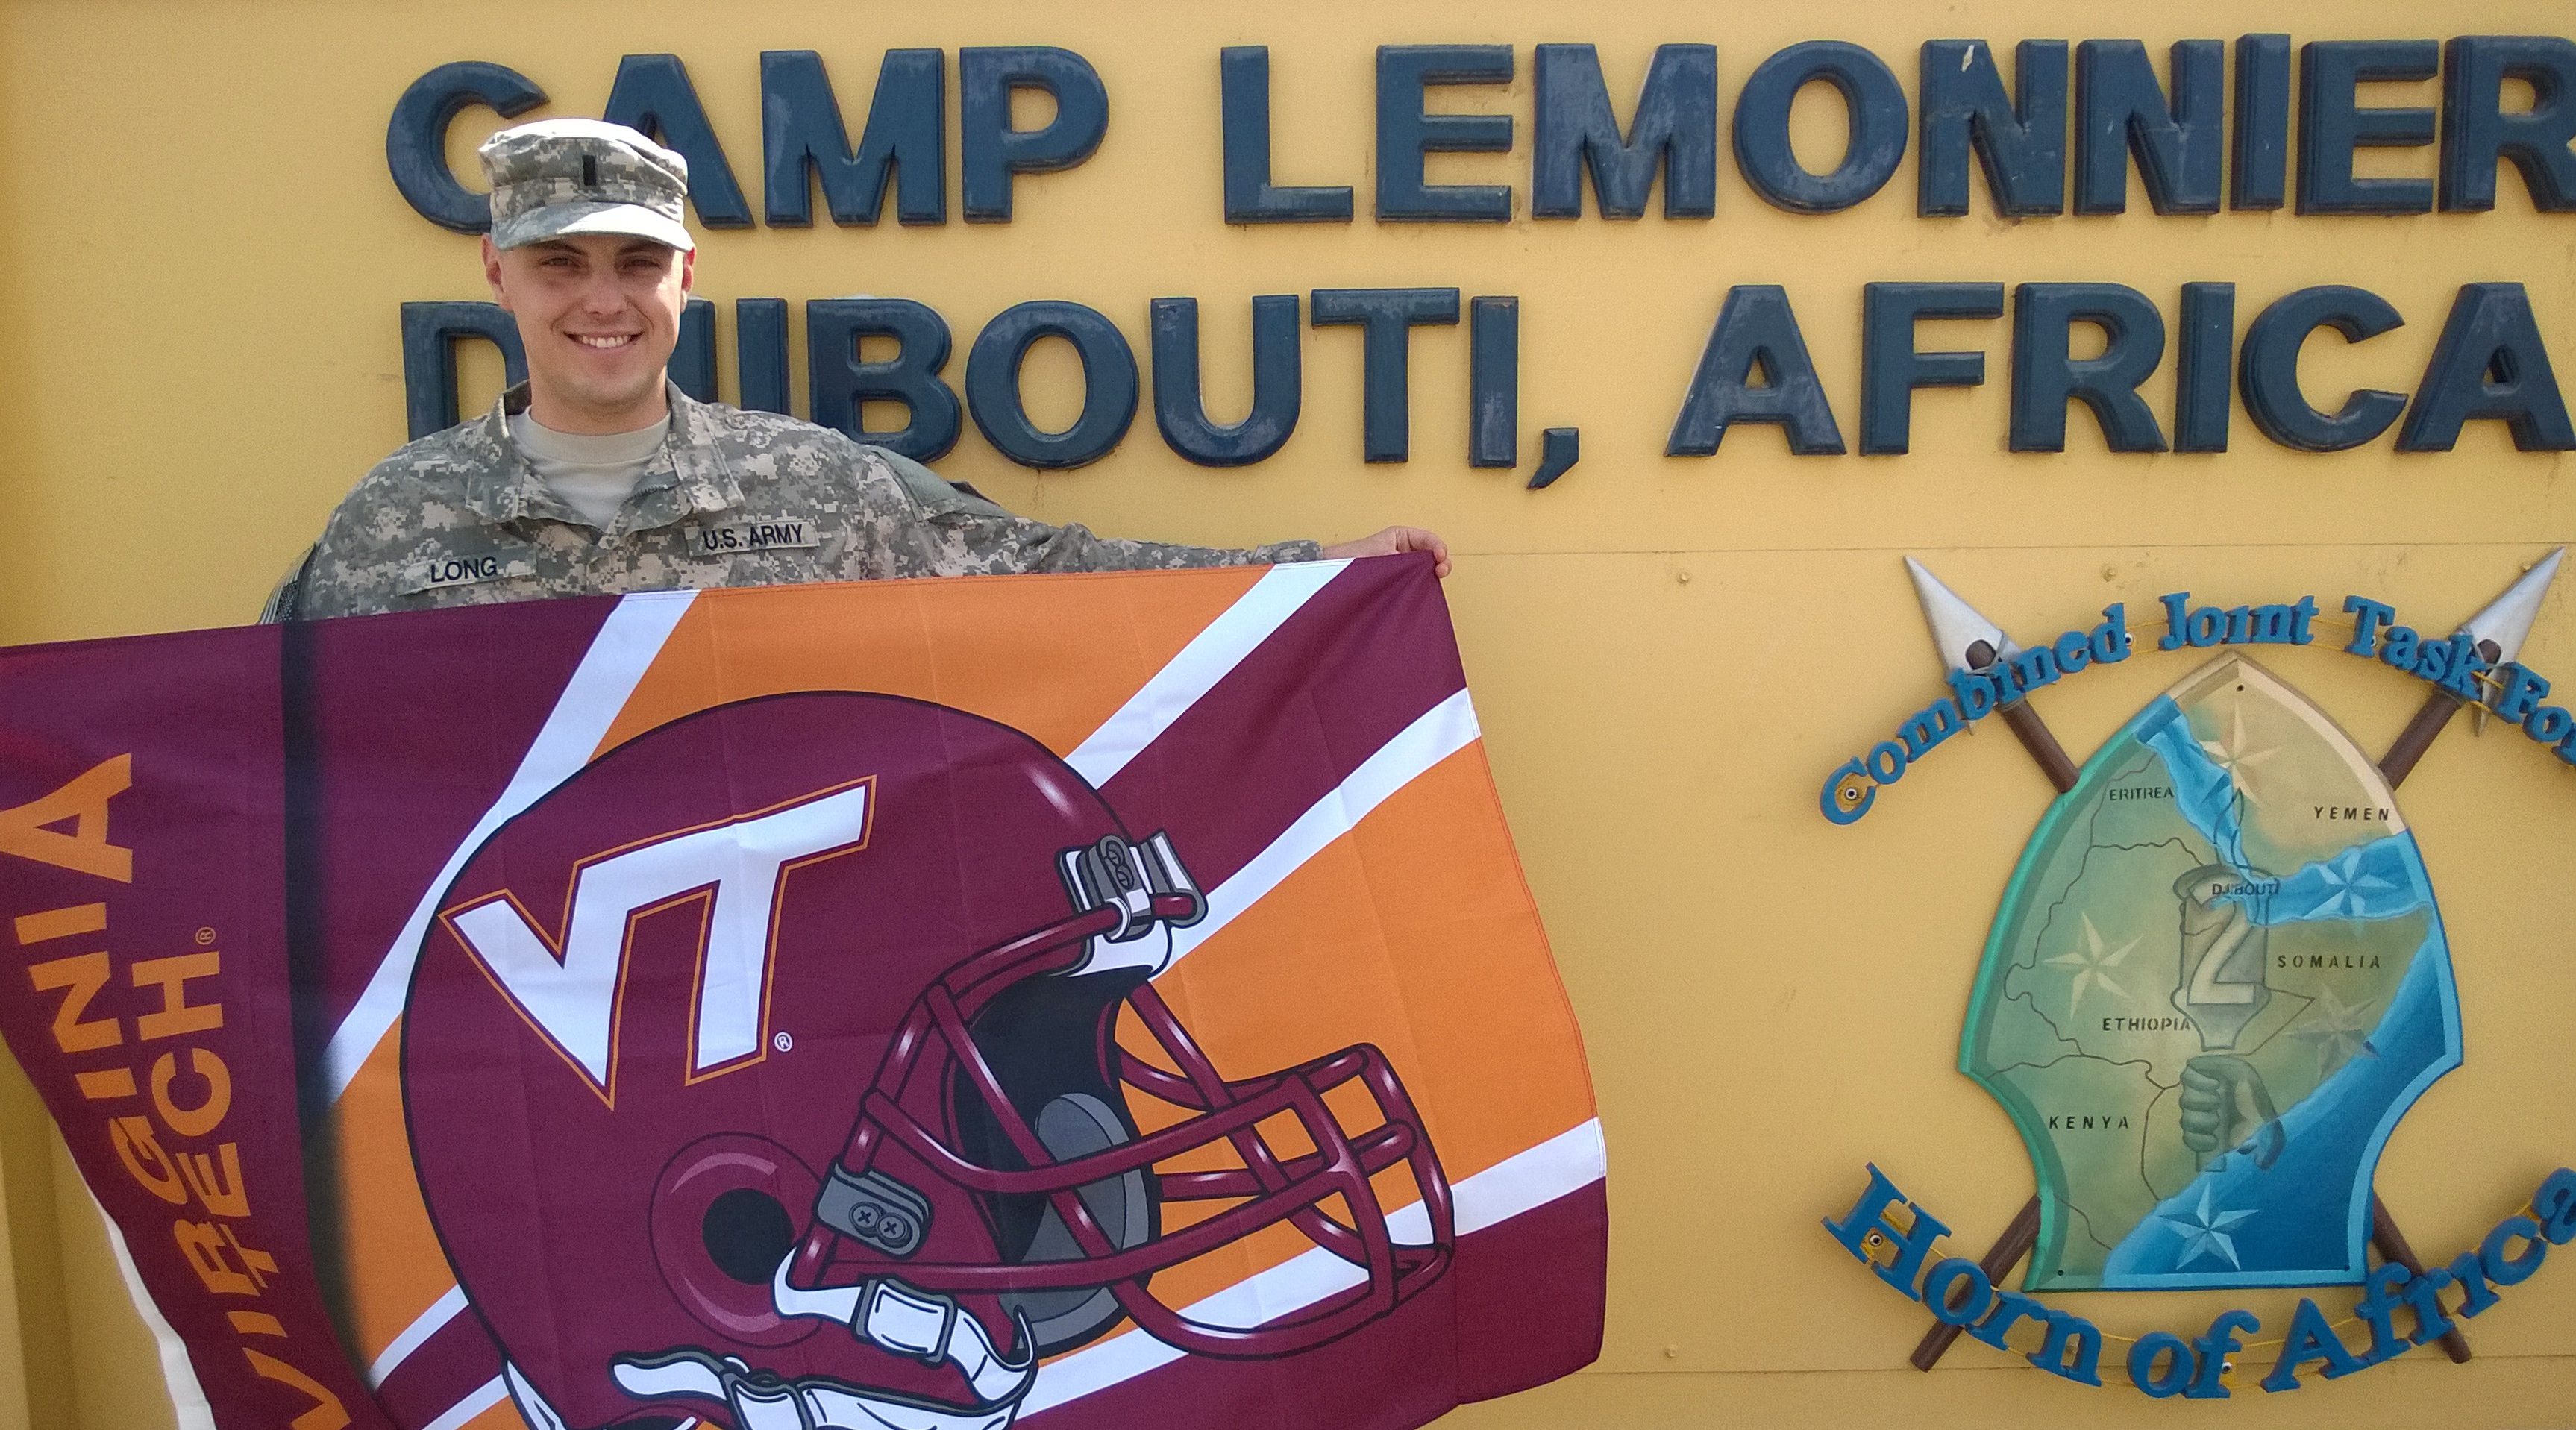 1st Lt. John Long, U.S. Army, Virginia Tech Corps of Cadets Class of 2011 from his deployed location in Africa.